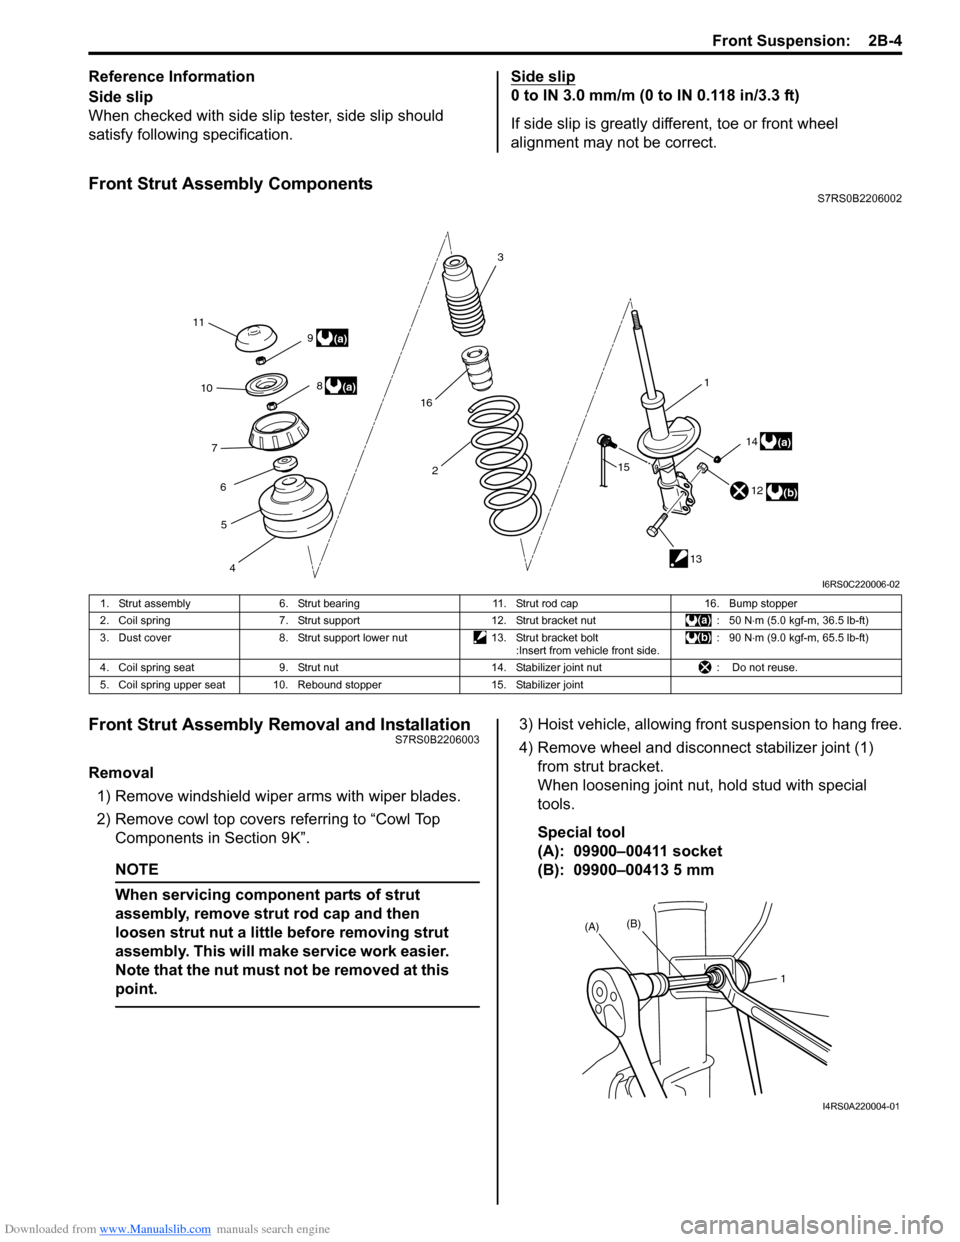 SUZUKI SWIFT 2008 2.G Service Workshop Manual Downloaded from www.Manualslib.com manuals search engine Front Suspension:  2B-4
Reference Information
Side slip
When checked with side slip tester, side slip should 
satisfy following specification.S